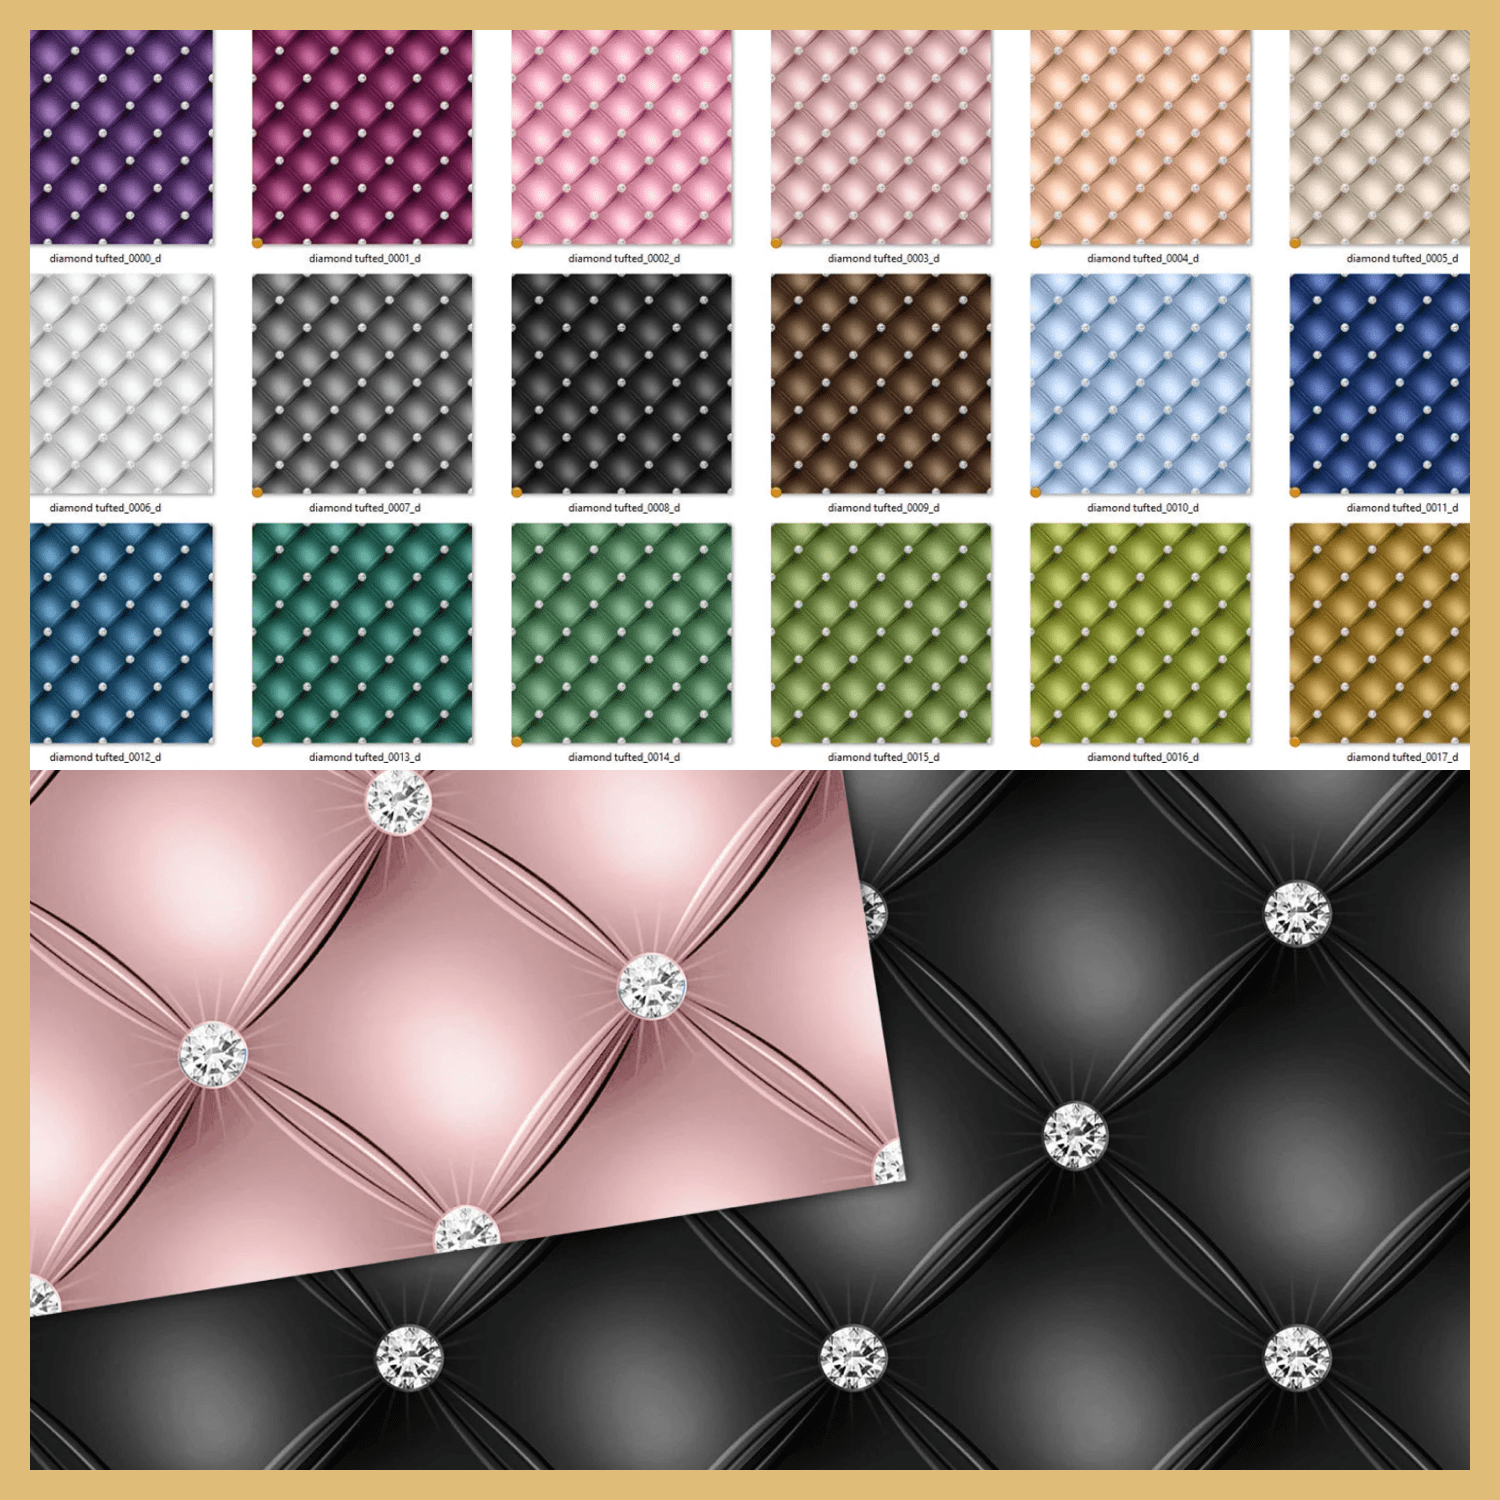 Diamond Tufted Digital Paper - Luxury Quilted backgrounds cover.